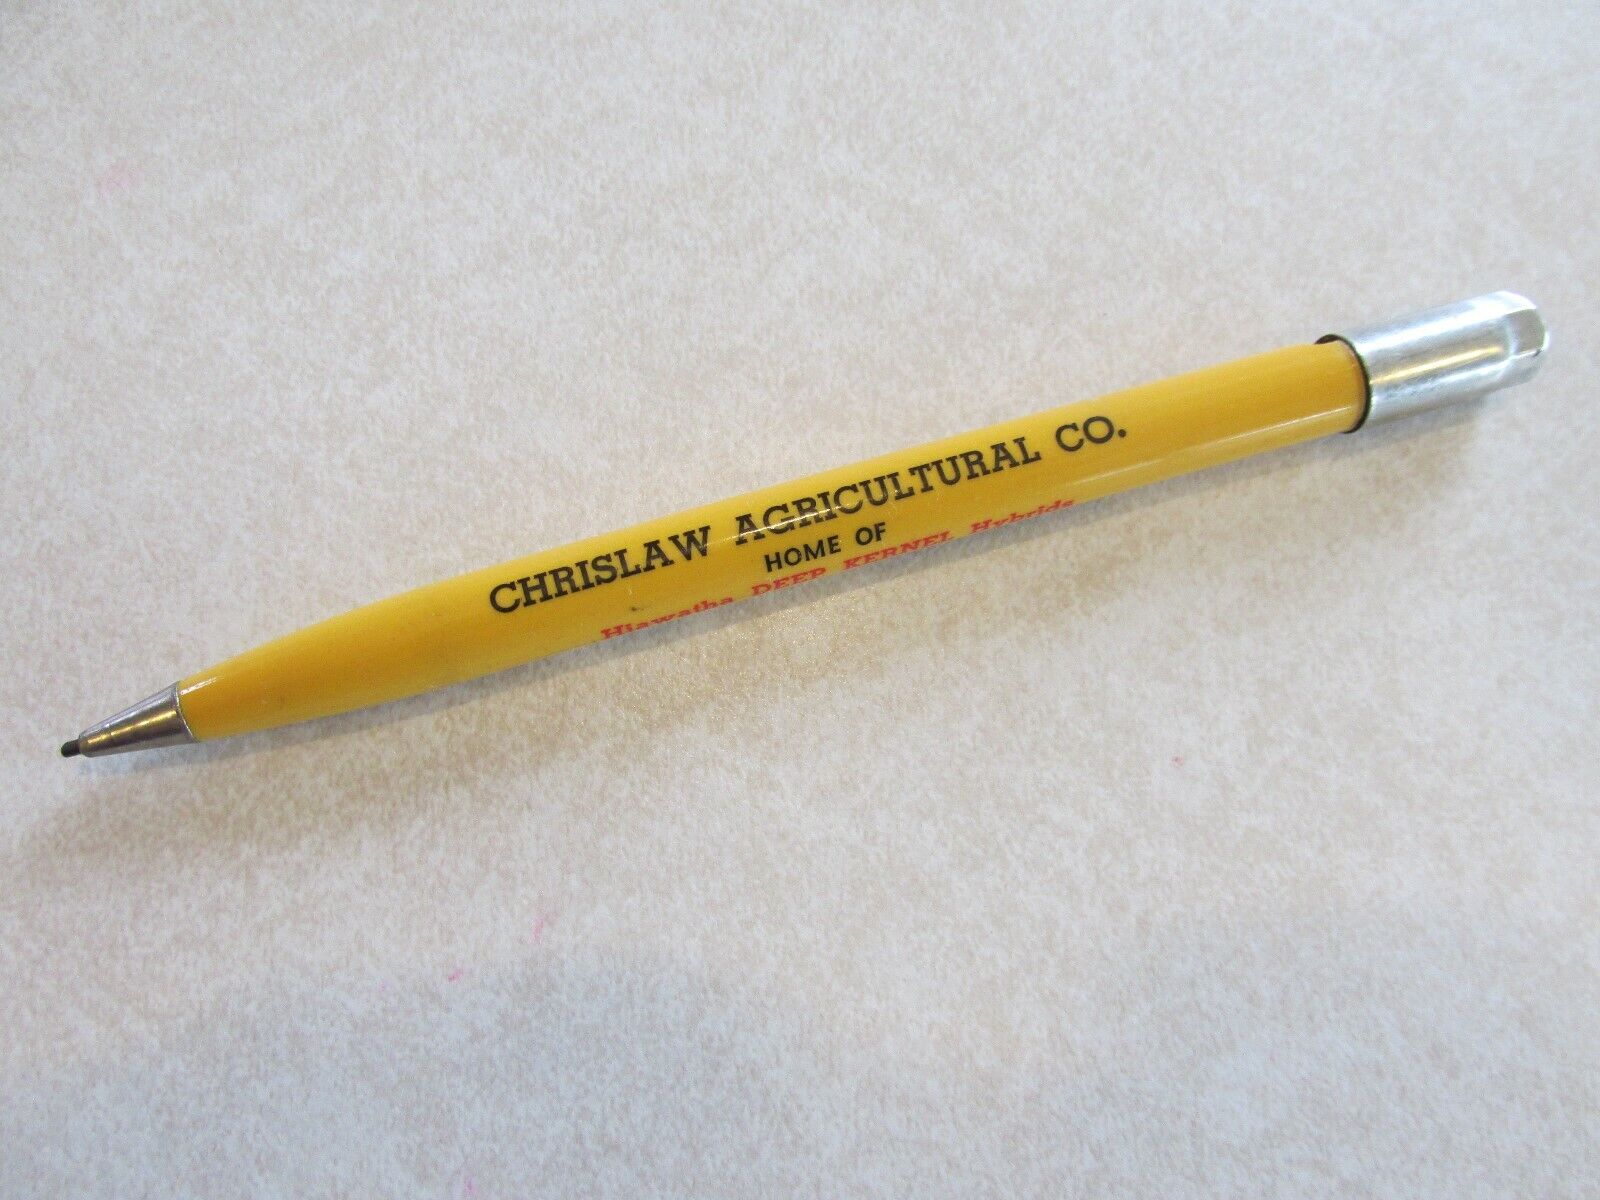 P99a Advertising Mechanical Pencil Chrislaw Agricultural Co Shirland Il Illinois